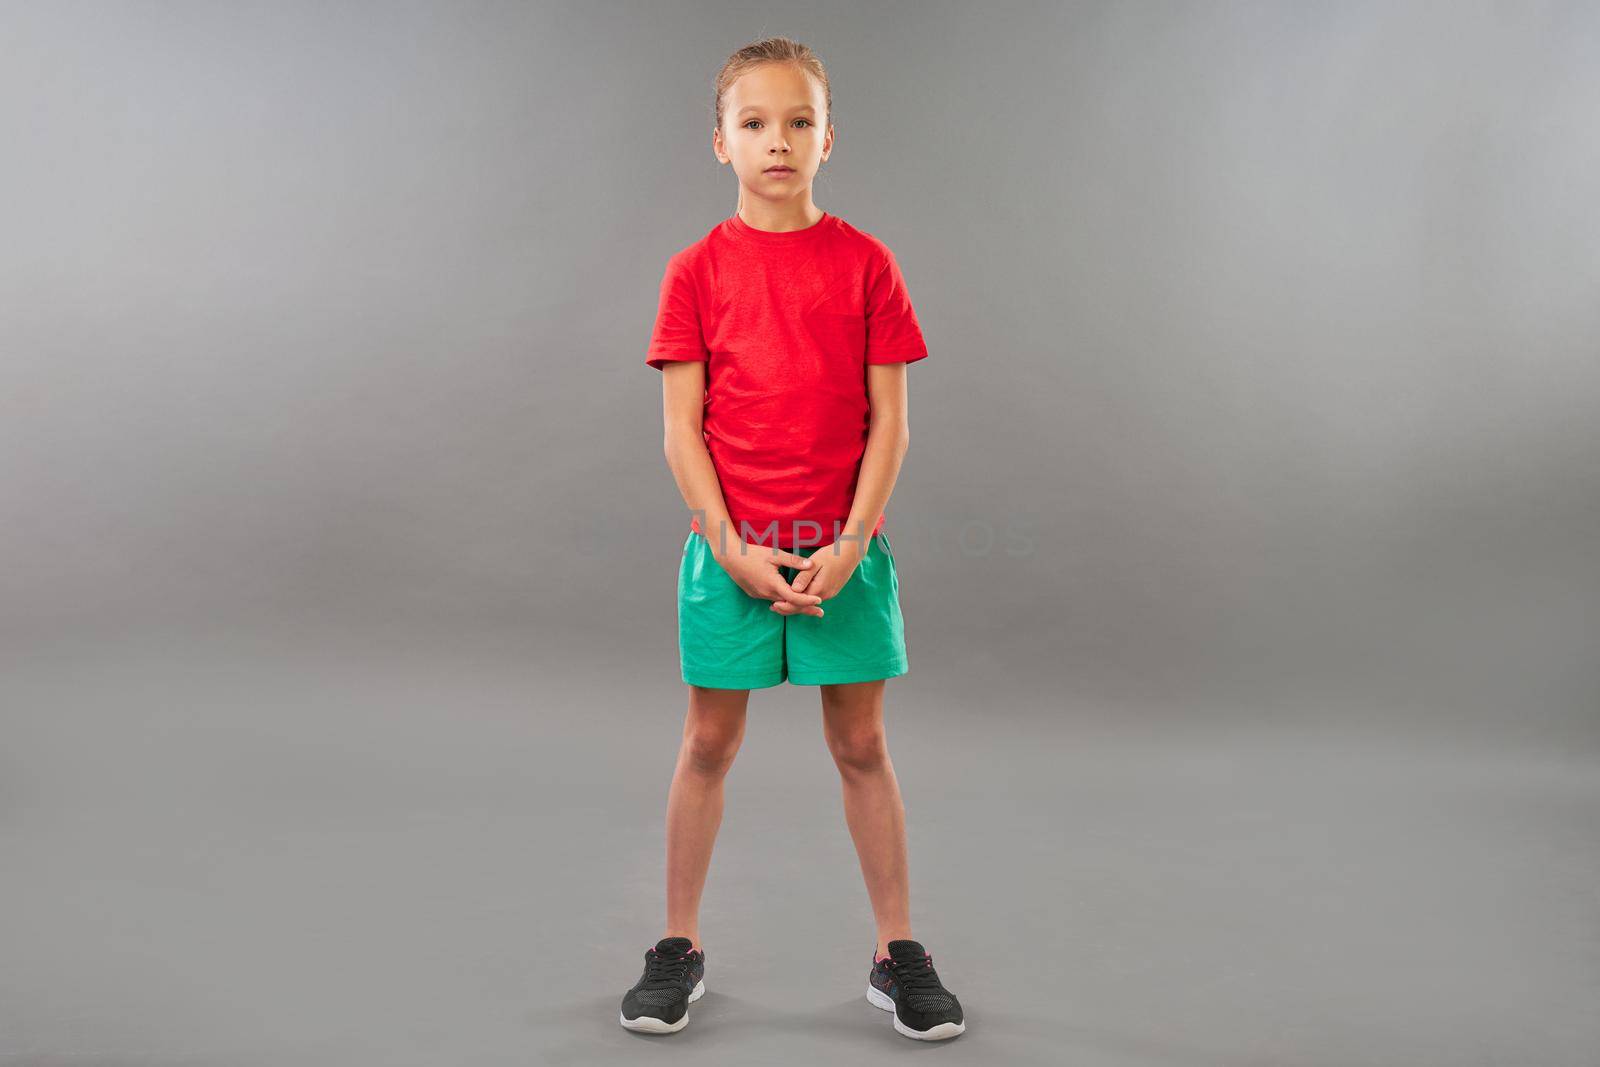 Adorable girl in red shirt and sport shorts looking at camera with serious expression